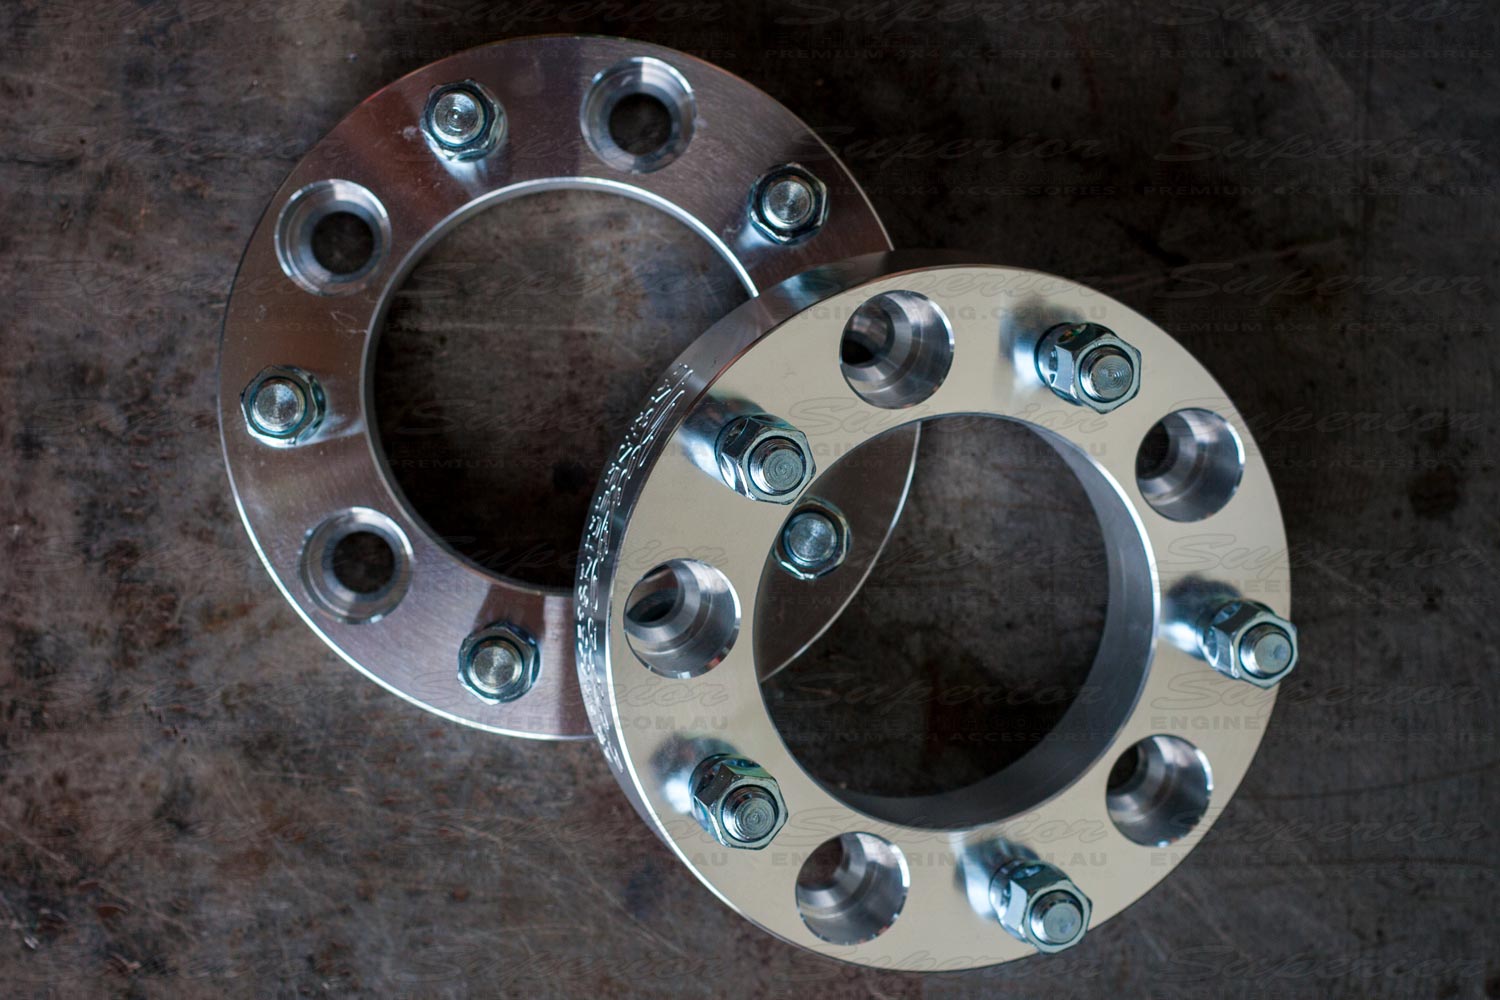 Top view of a pair of premium Superior 5 stud 2 inch wheel spacers